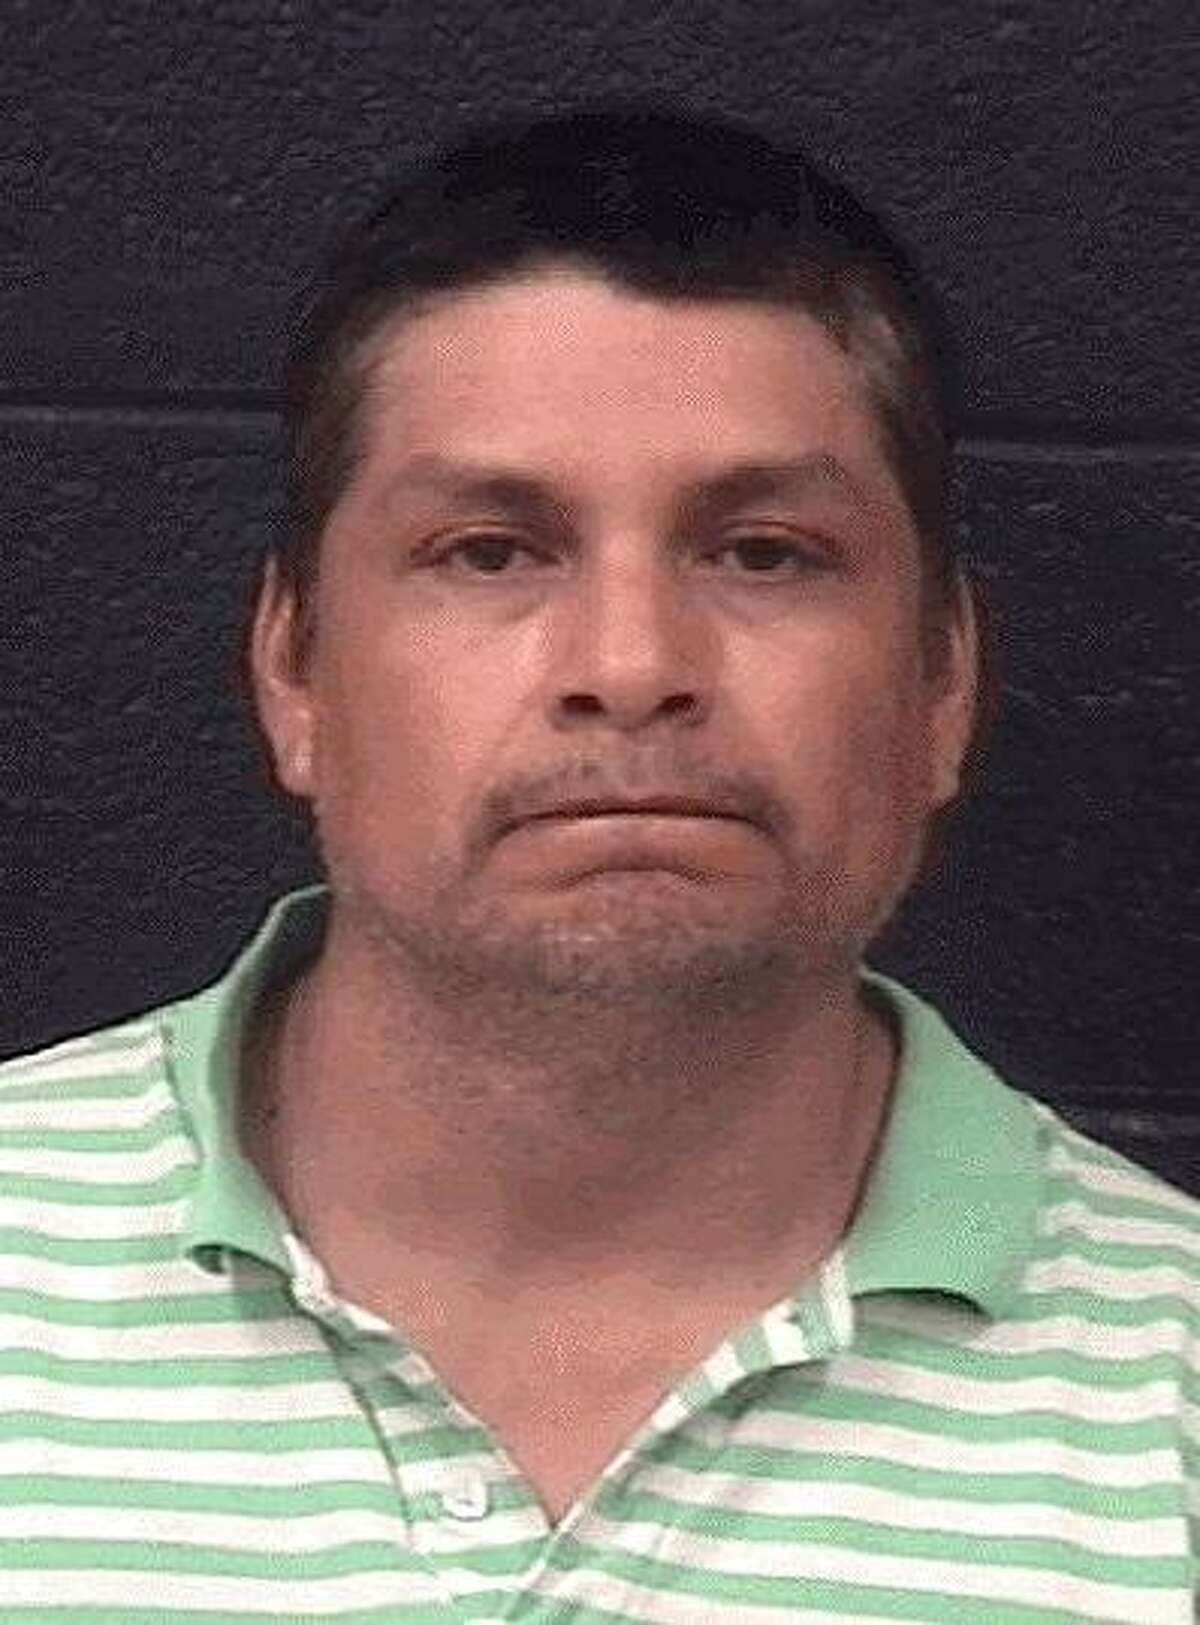 Juan Ramon Meza is pictured. Keep clicking through the gallery to see more photos of Mami Chulas, as well as a list of crimes that most often occur in Texas prisons.